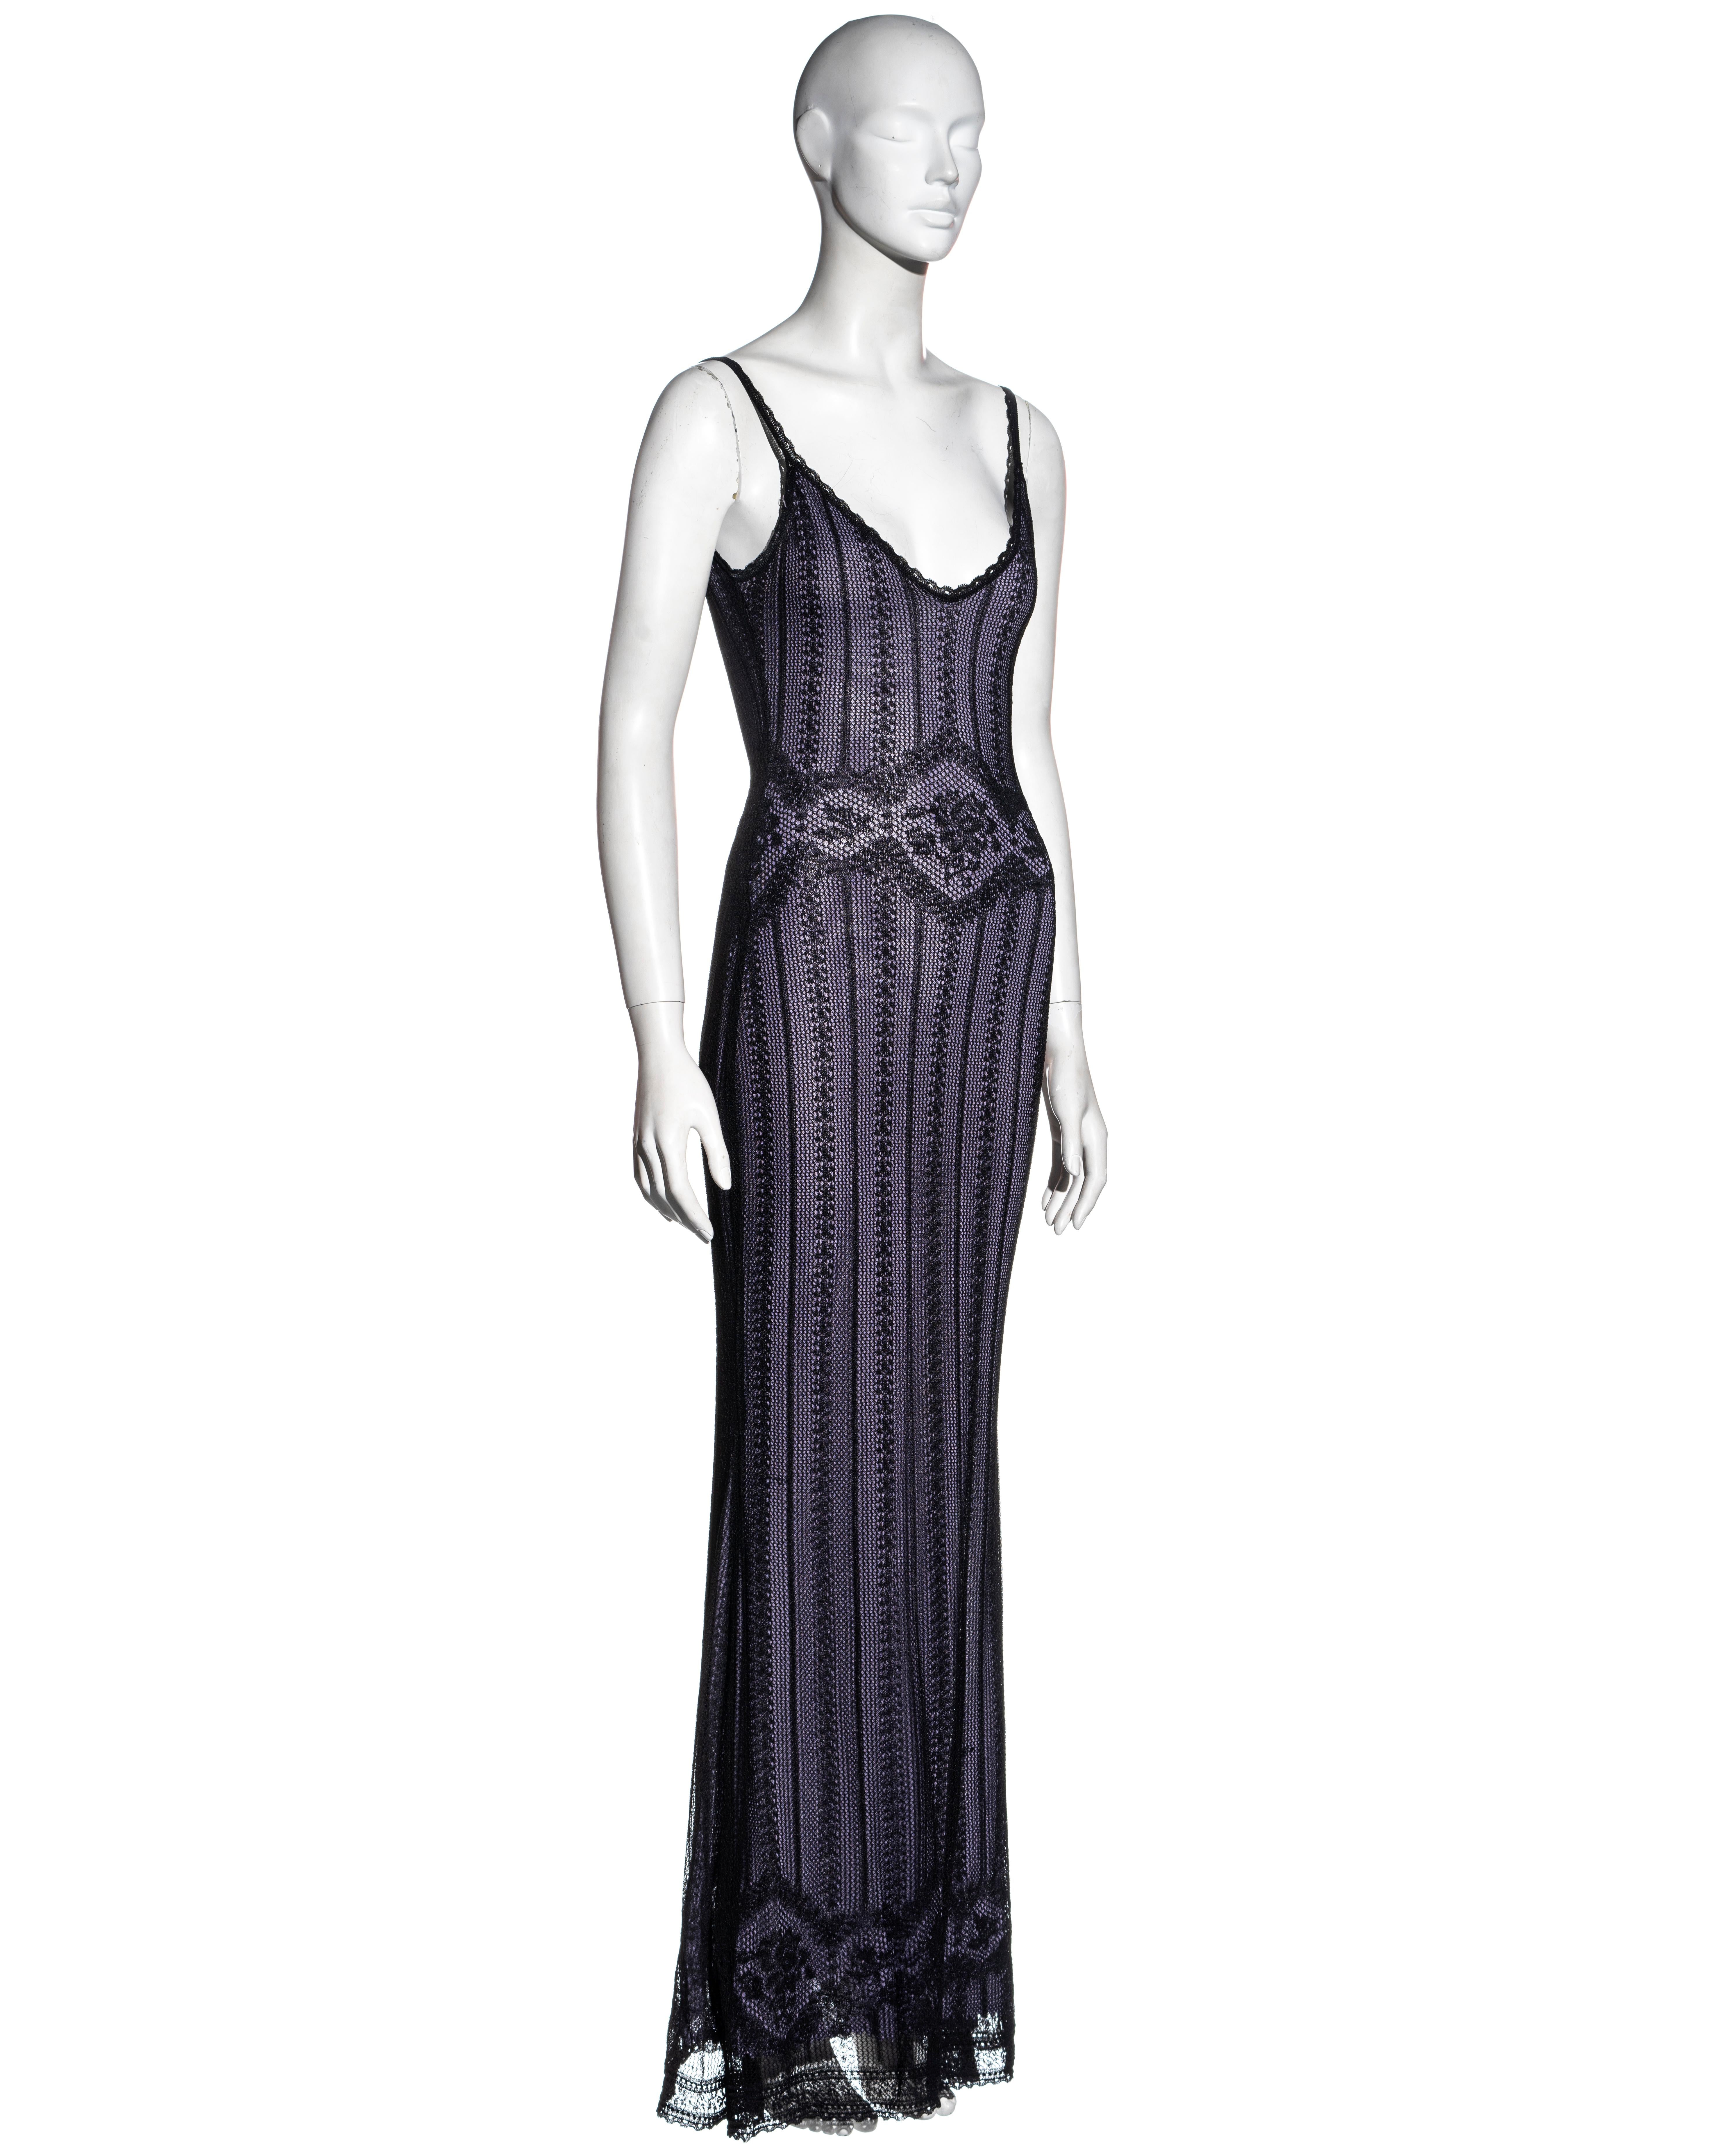 Women's Christian Dior by John Galliano black lace evening dress and shawl, fw 1998 For Sale